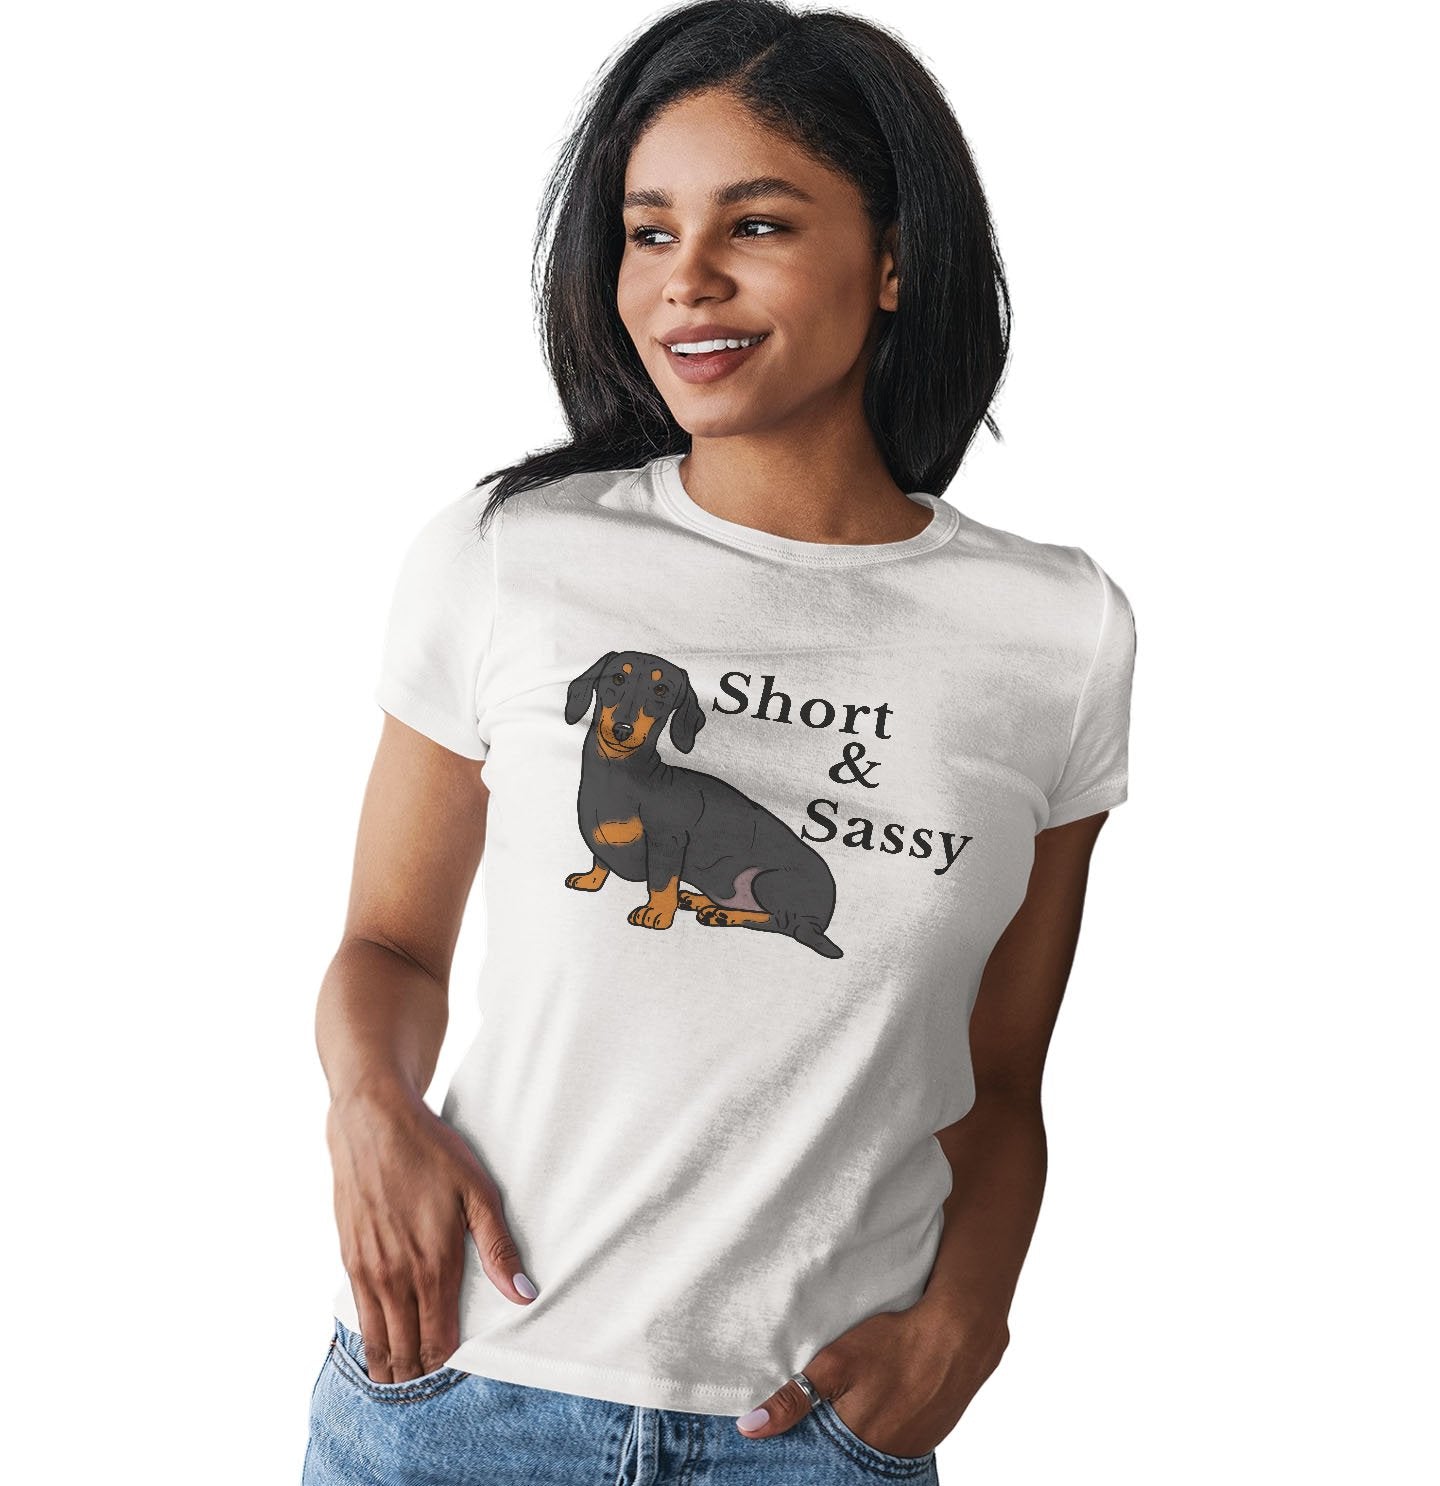 Short and Sassy - Women's Fitted T-Shirt